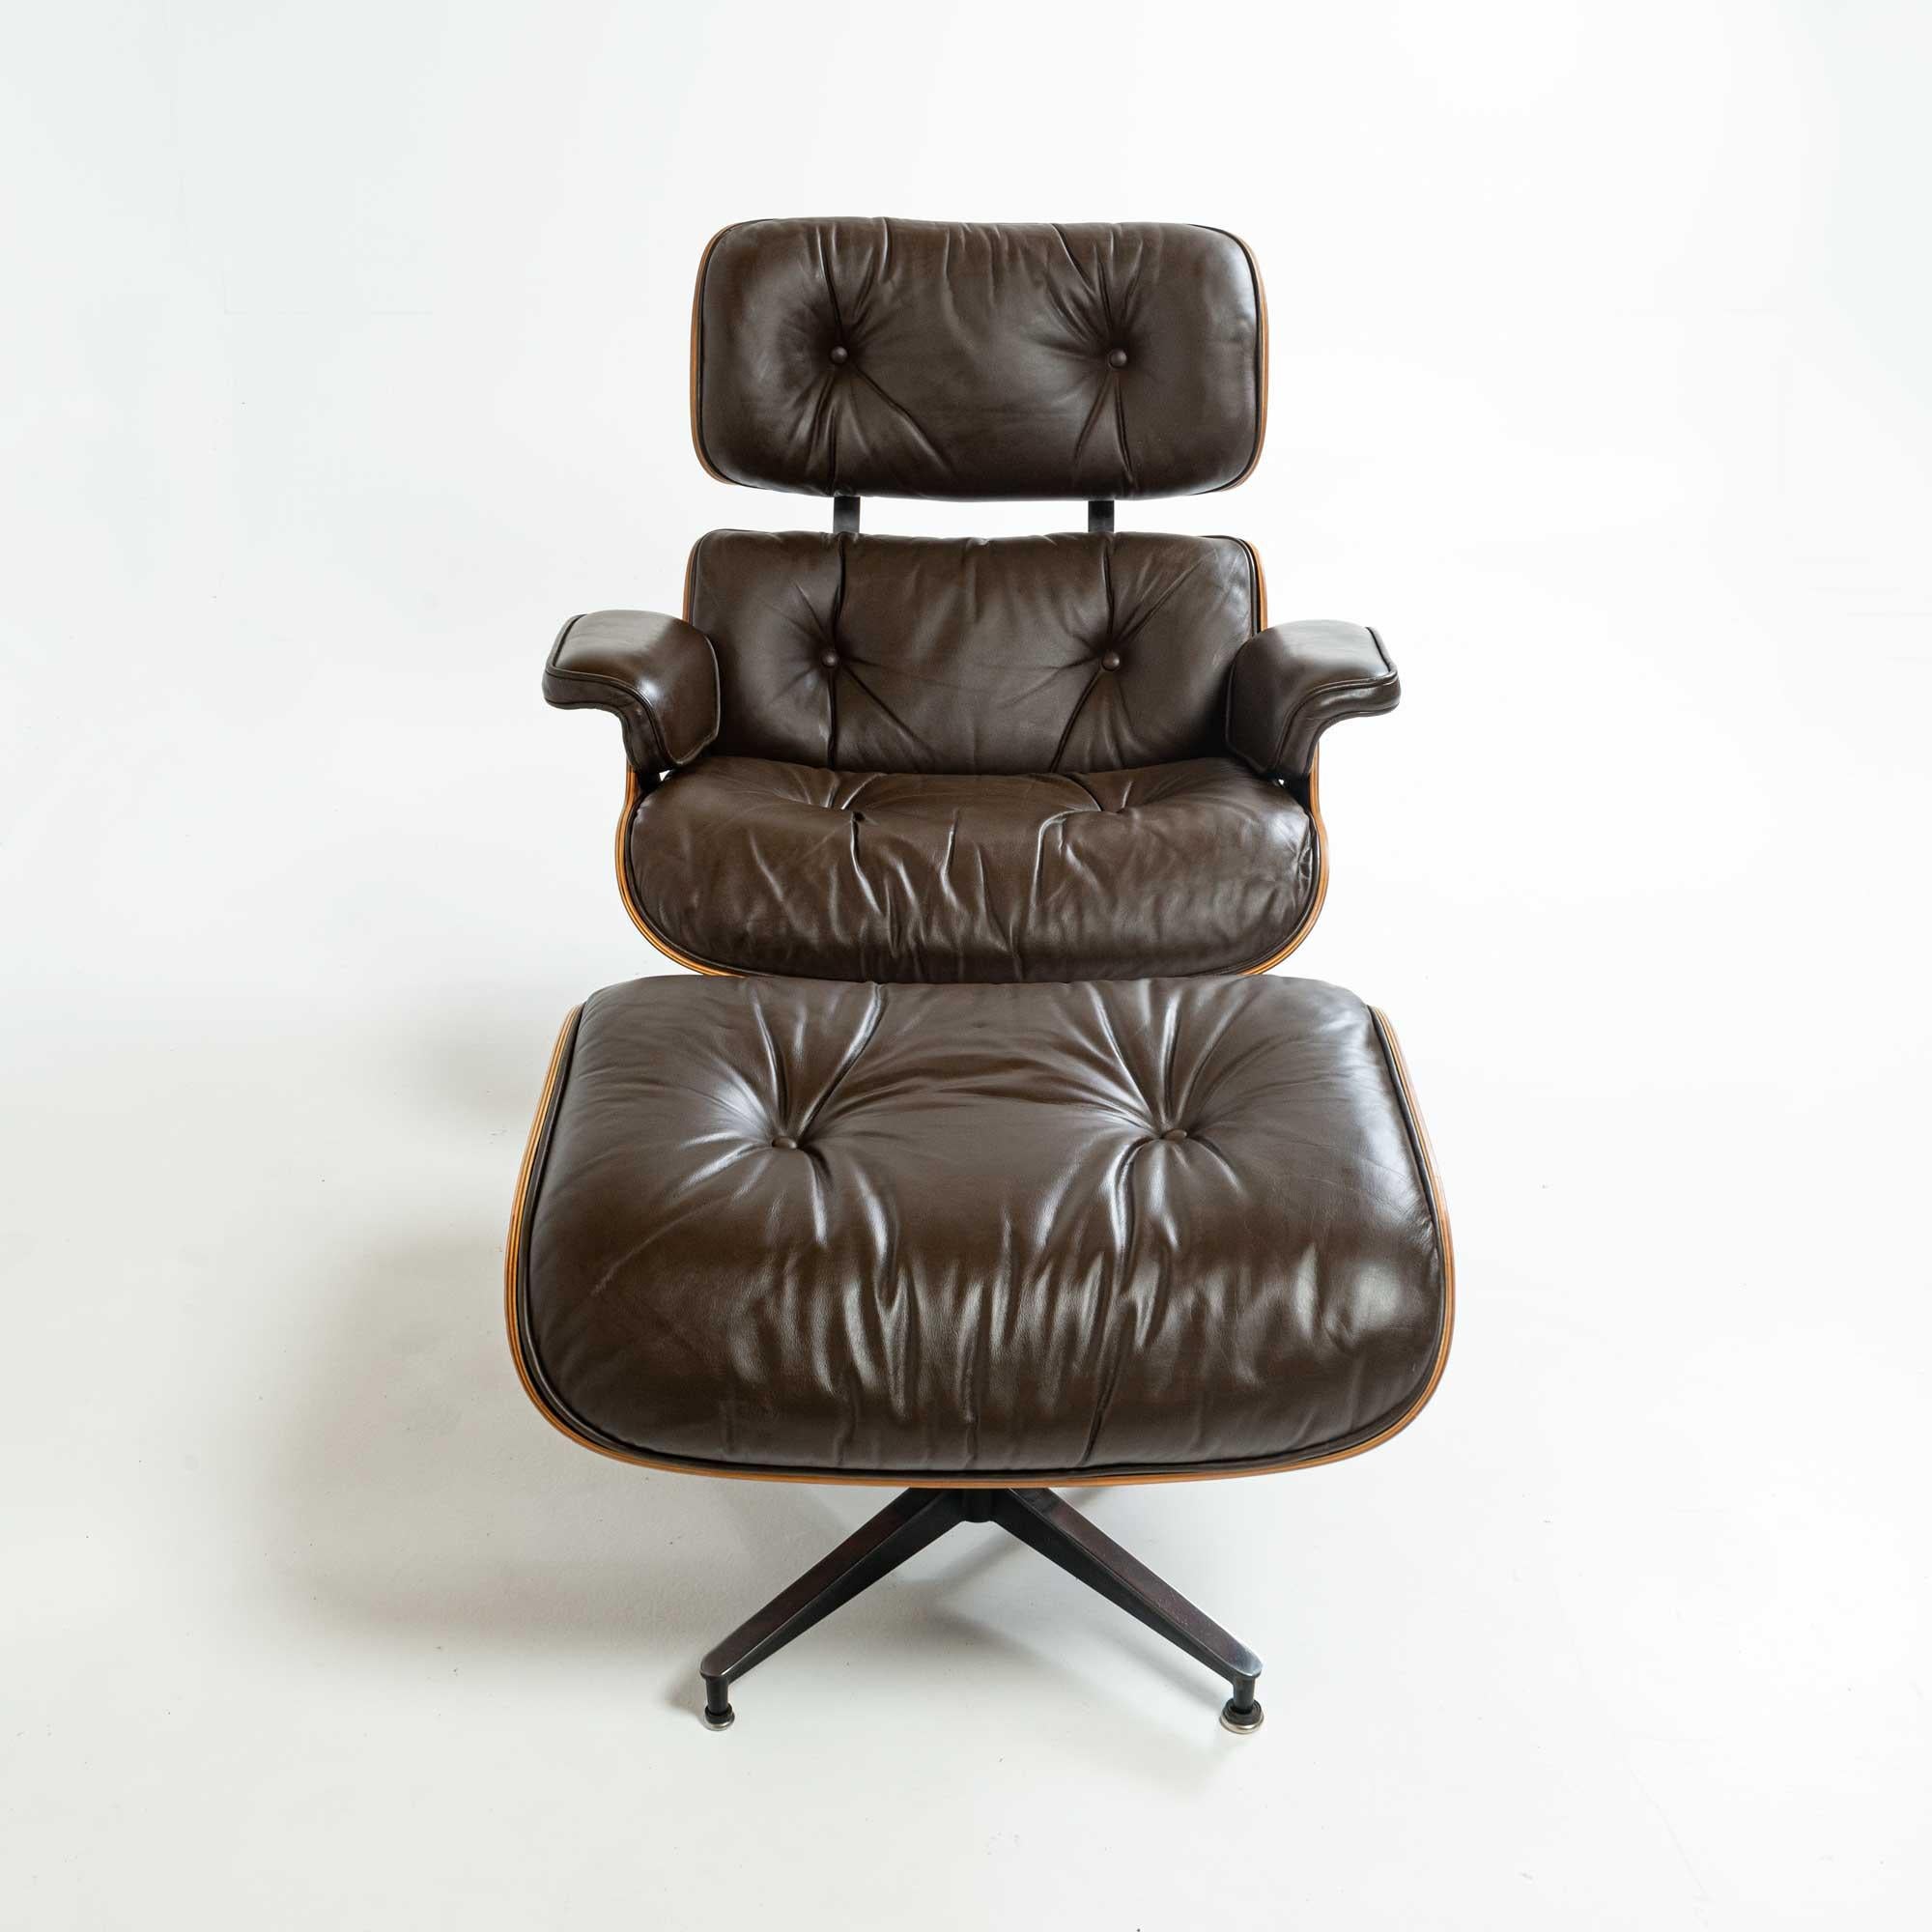 American 3rd Gen Eames Lounge Chair 670-671 in Original Chocolate Leather For Sale